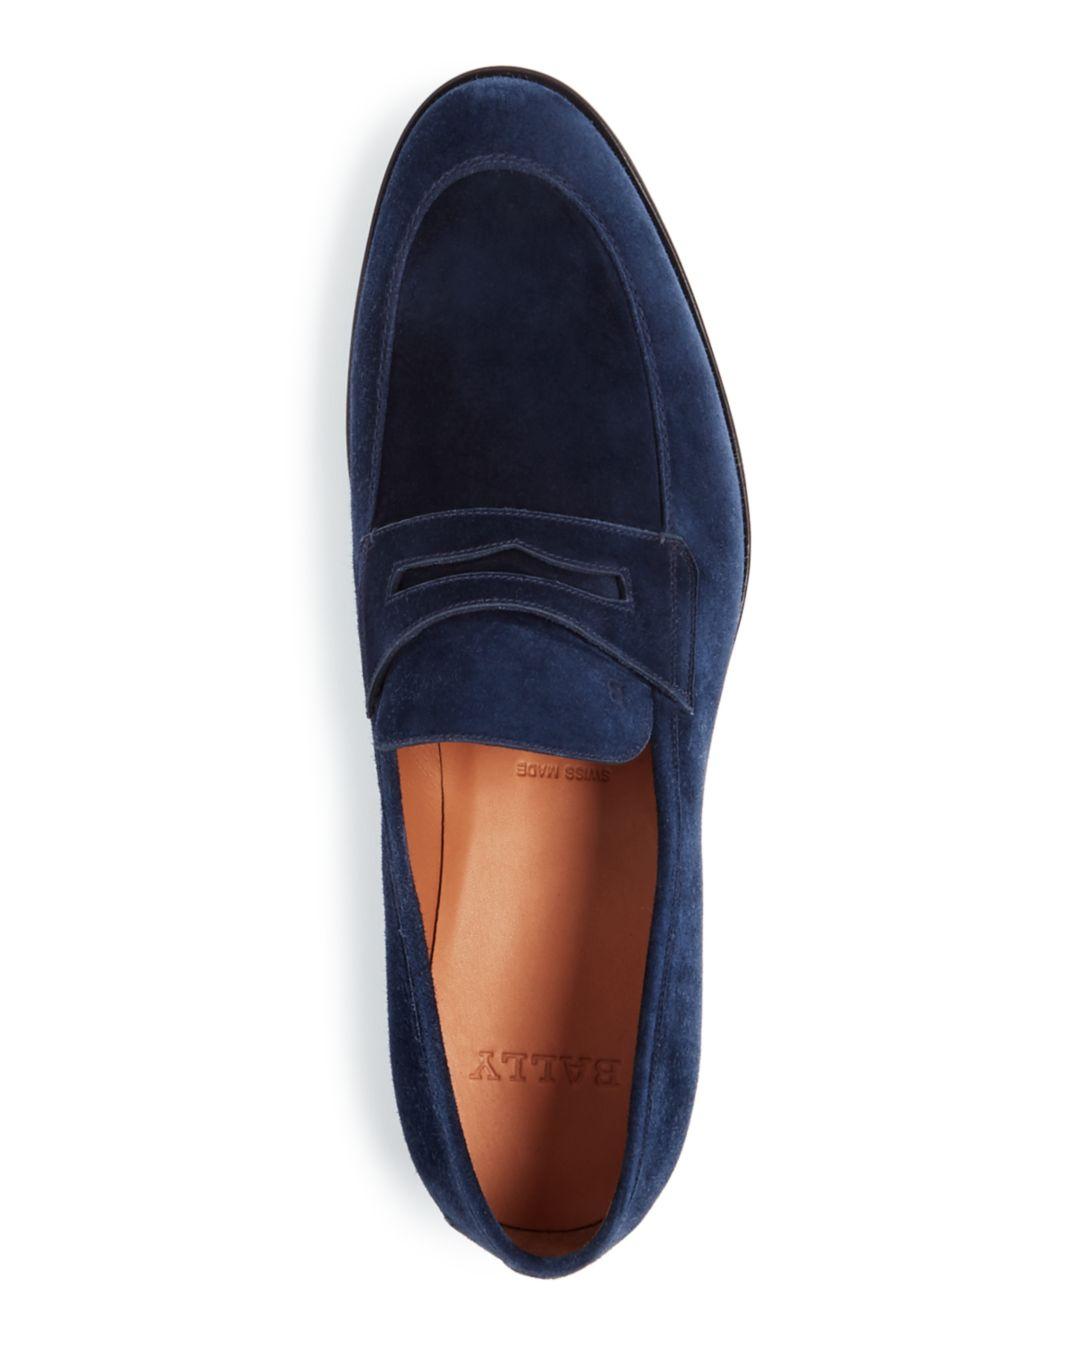 Bally Webb Apron Toe Loafers in for | Lyst